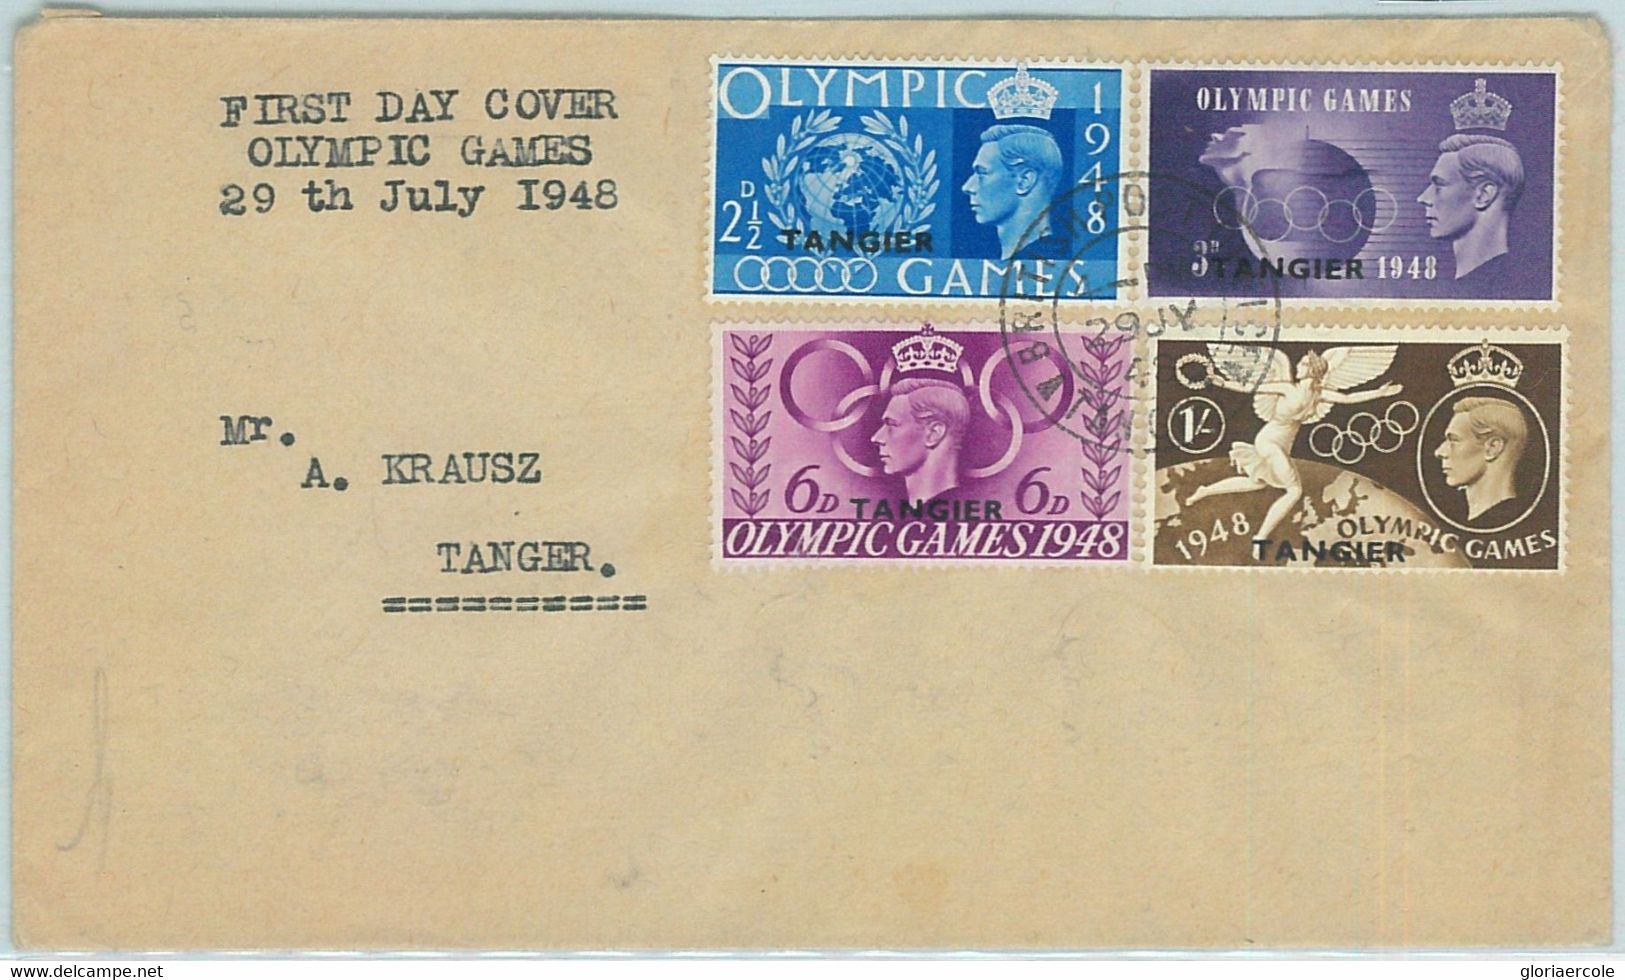 68020 -  TANGIER - POSTAL HISTORY -  1948  Olympic Games  FDC Cover! - Sommer 1948: London